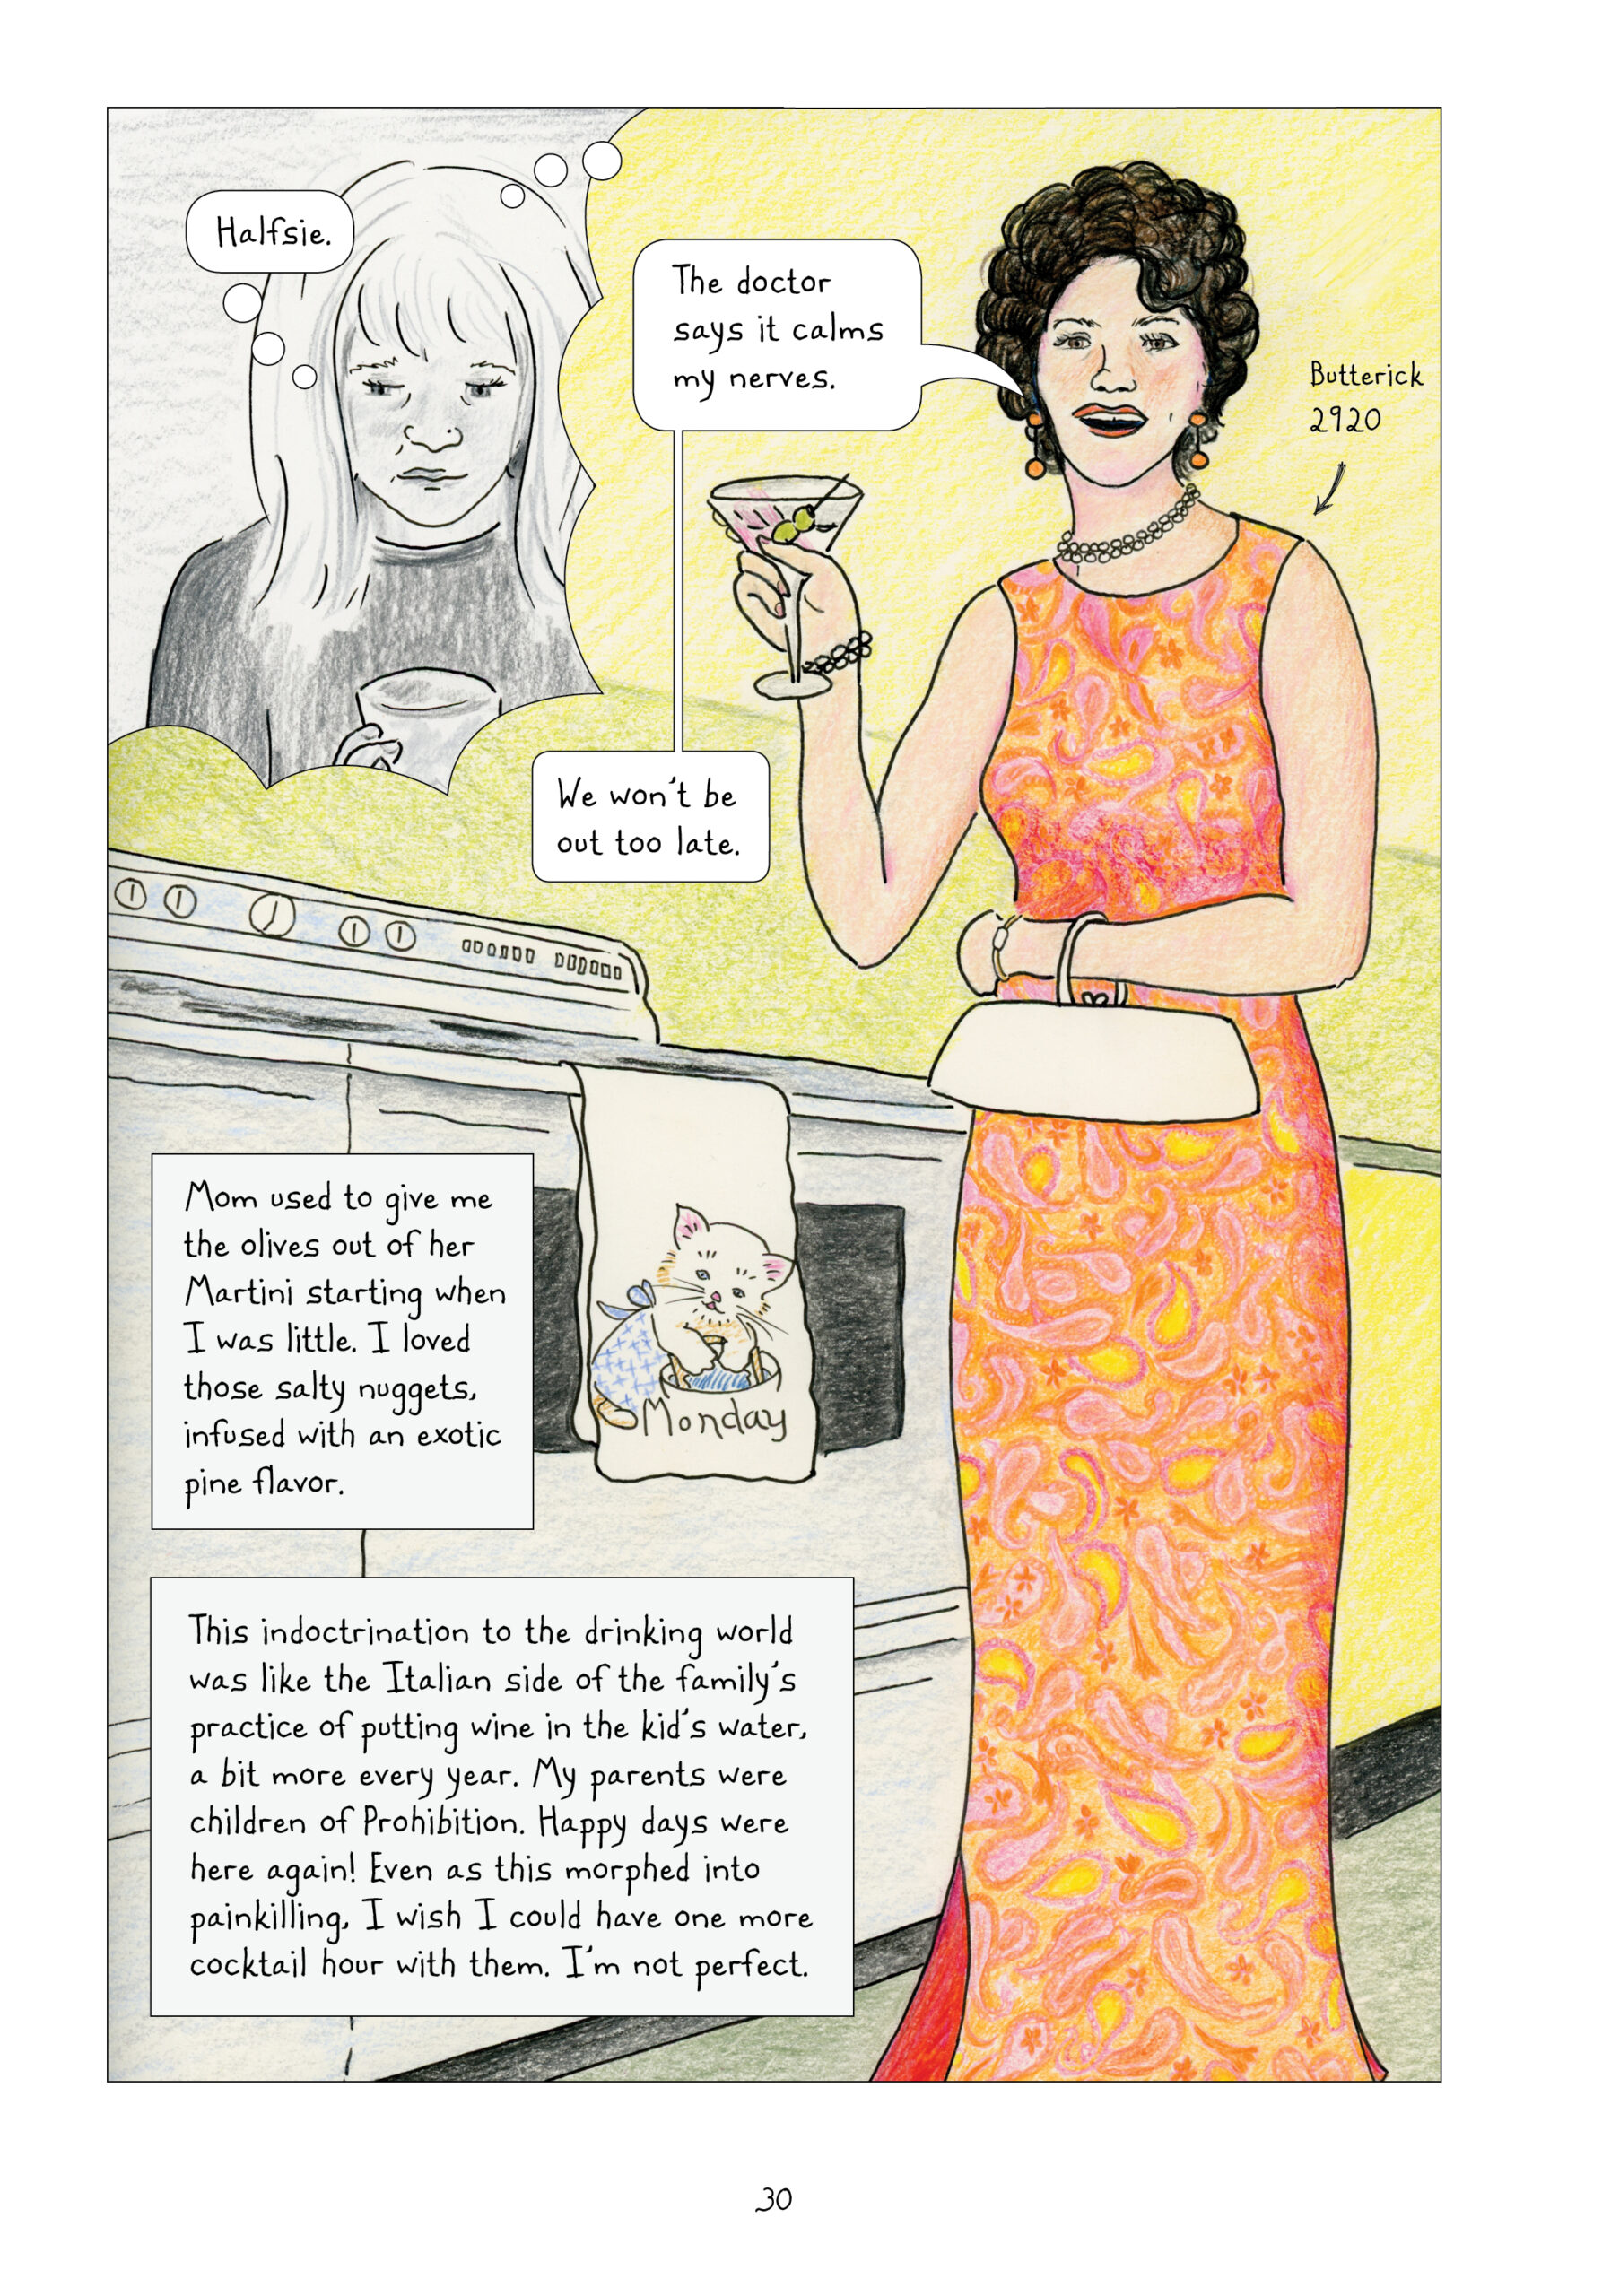 Adult Lynn in black and white looks down sadly at her glass, and thinks to herself, "Halfsie." She imagines a scene, in full-color, of her mom standing in a yellow kitchen next to an oven. Lorraine wears a groovy floor-length, sleeveless dress of orange, yellow, and pink in a swirling paisley and flower pattern. Lynn identifies the dress as a Butterick 2920, a vintage sewing pattern. Lorraine also wears a short, white beaded necklace and a matching bracelet, orange geometric earrings, and a white clutch purse around her wrist. She holds up a dirty martini, smiles, and says, "The doctor says it calms my nerves. We won't be out too late." Hanging from the oven door handle is a towel of a cute cat wearing an apron, bent over a mixing bowl, and inscribed, "Monday." Lynn narrates, "Mom used to give me the olives out of her Martini starting when I was little. I loved those salty nuggets, infused with an exotic pine flavor. This indoctrination to the drinking world was like the Italian side of the family's practice of putting wine in the kid's water, a bit more every year. My parents were children of Prohibition. Happy days were here again! Even as this morphed into painkilling. I wish I could have one more cocktail hour with them. I'm not perfect."